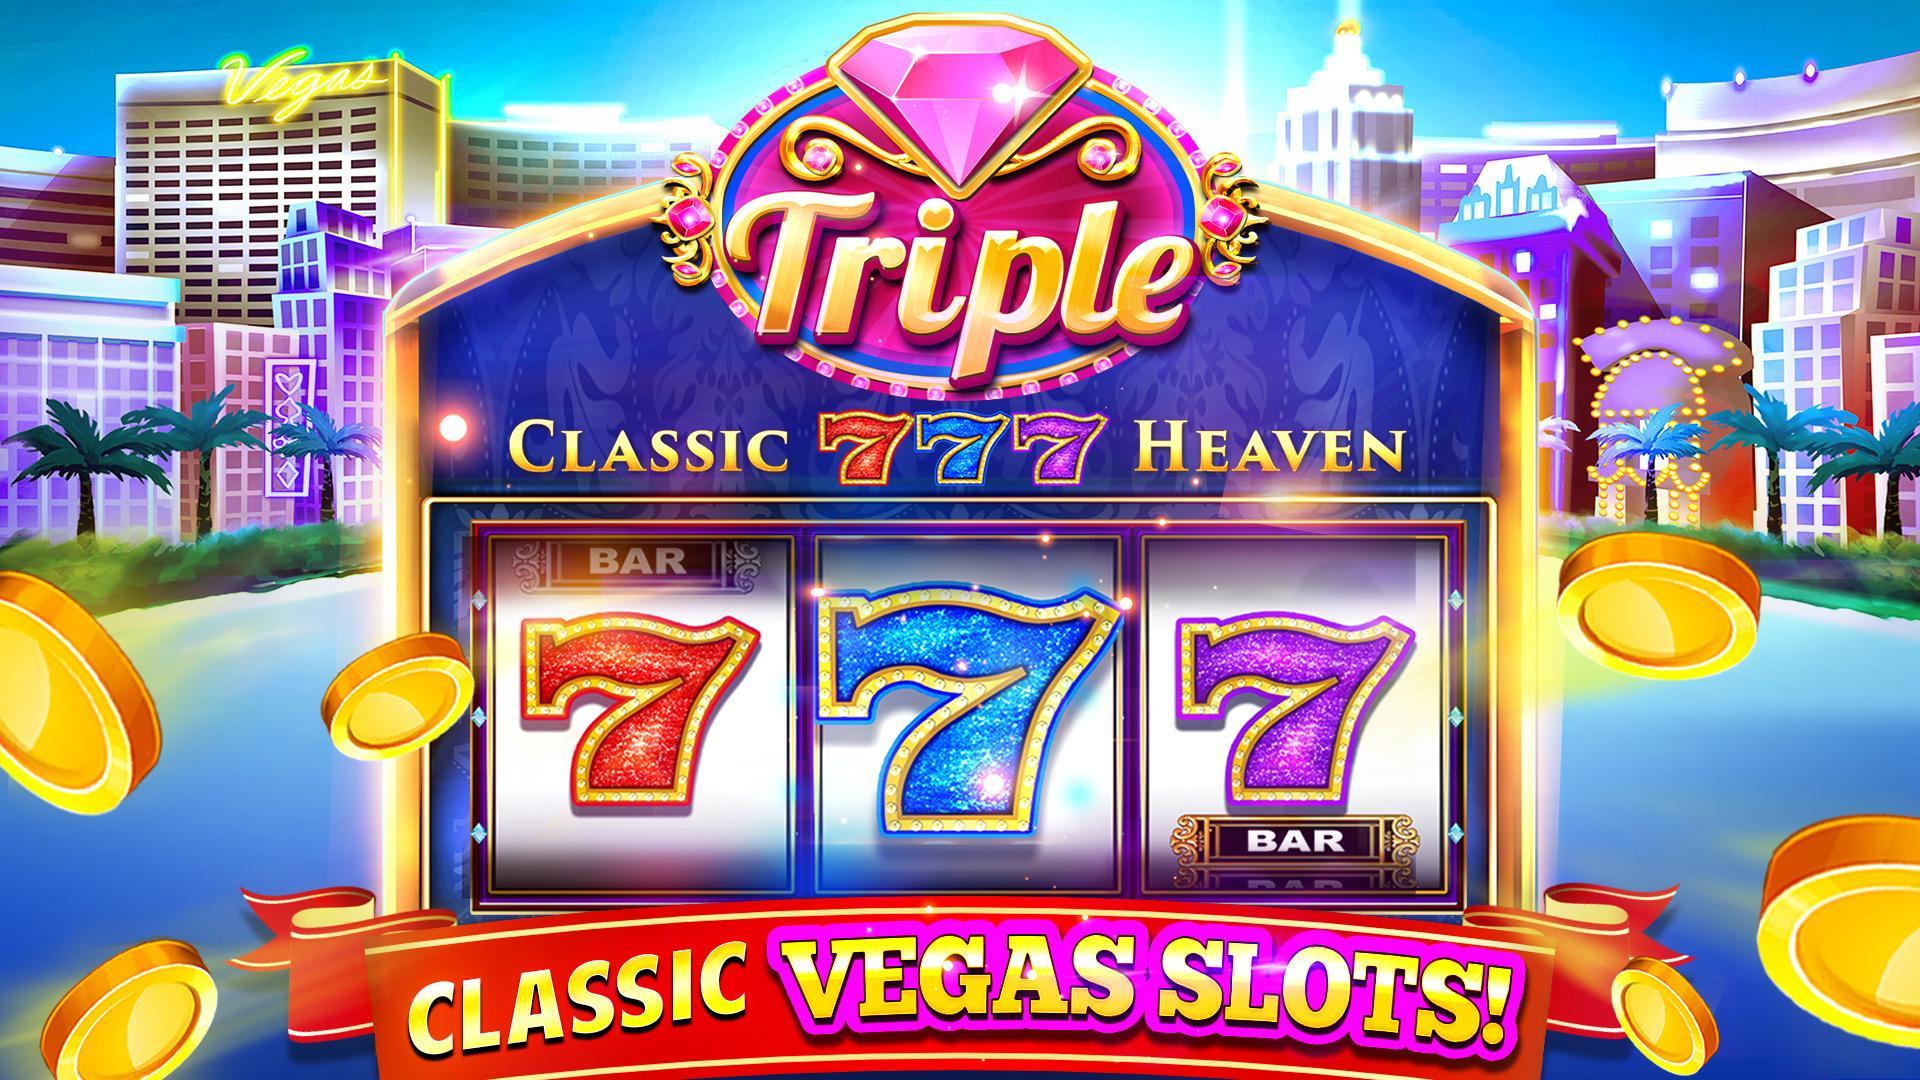 Casino 777 Slots For Free